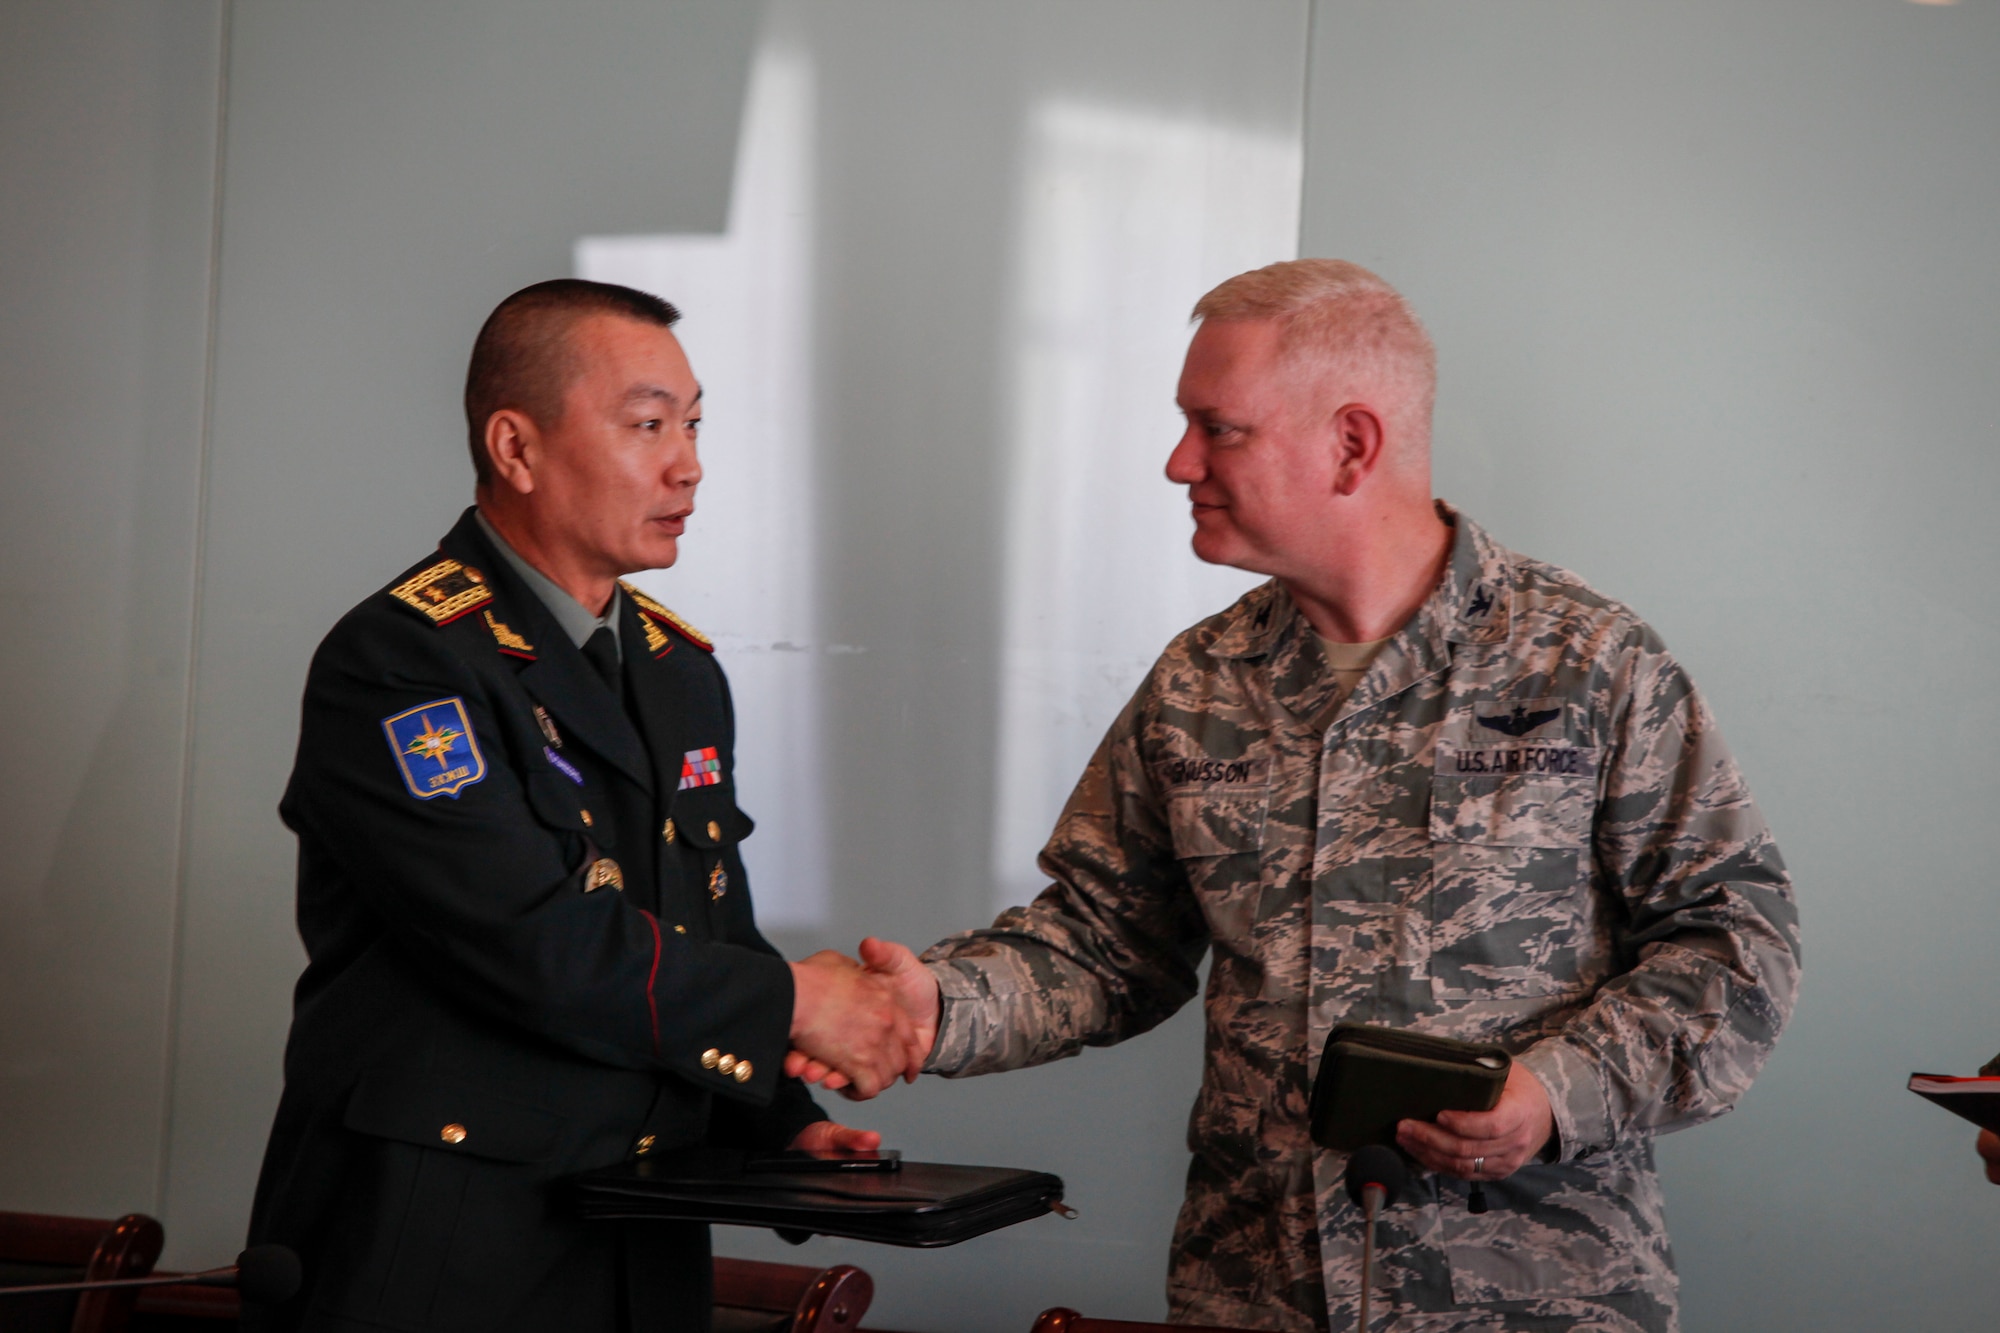 Mongolian Armed Forces Brig. Gen. D.Ganzorig, left, U.S. Air Force Col. Carl Magnusson, center, exercise co-director for Khaan Quest 16 and U.S. Marine Corps Maj. Robert Shuford, answer questions about the exercise at a media engagement at the Ministry of Defense, in Ulaanbatar, Mongolia, May 20, 2016. Khaan Quest is an annual, multinational peacekeeping operations exercise conducted in Mongolia and is the capstone exercise for this year's United Nations Global Peace Operations Initiative program. (U.S. Marine Corps photo by Cpl. Hilda M. Becerra / Released)